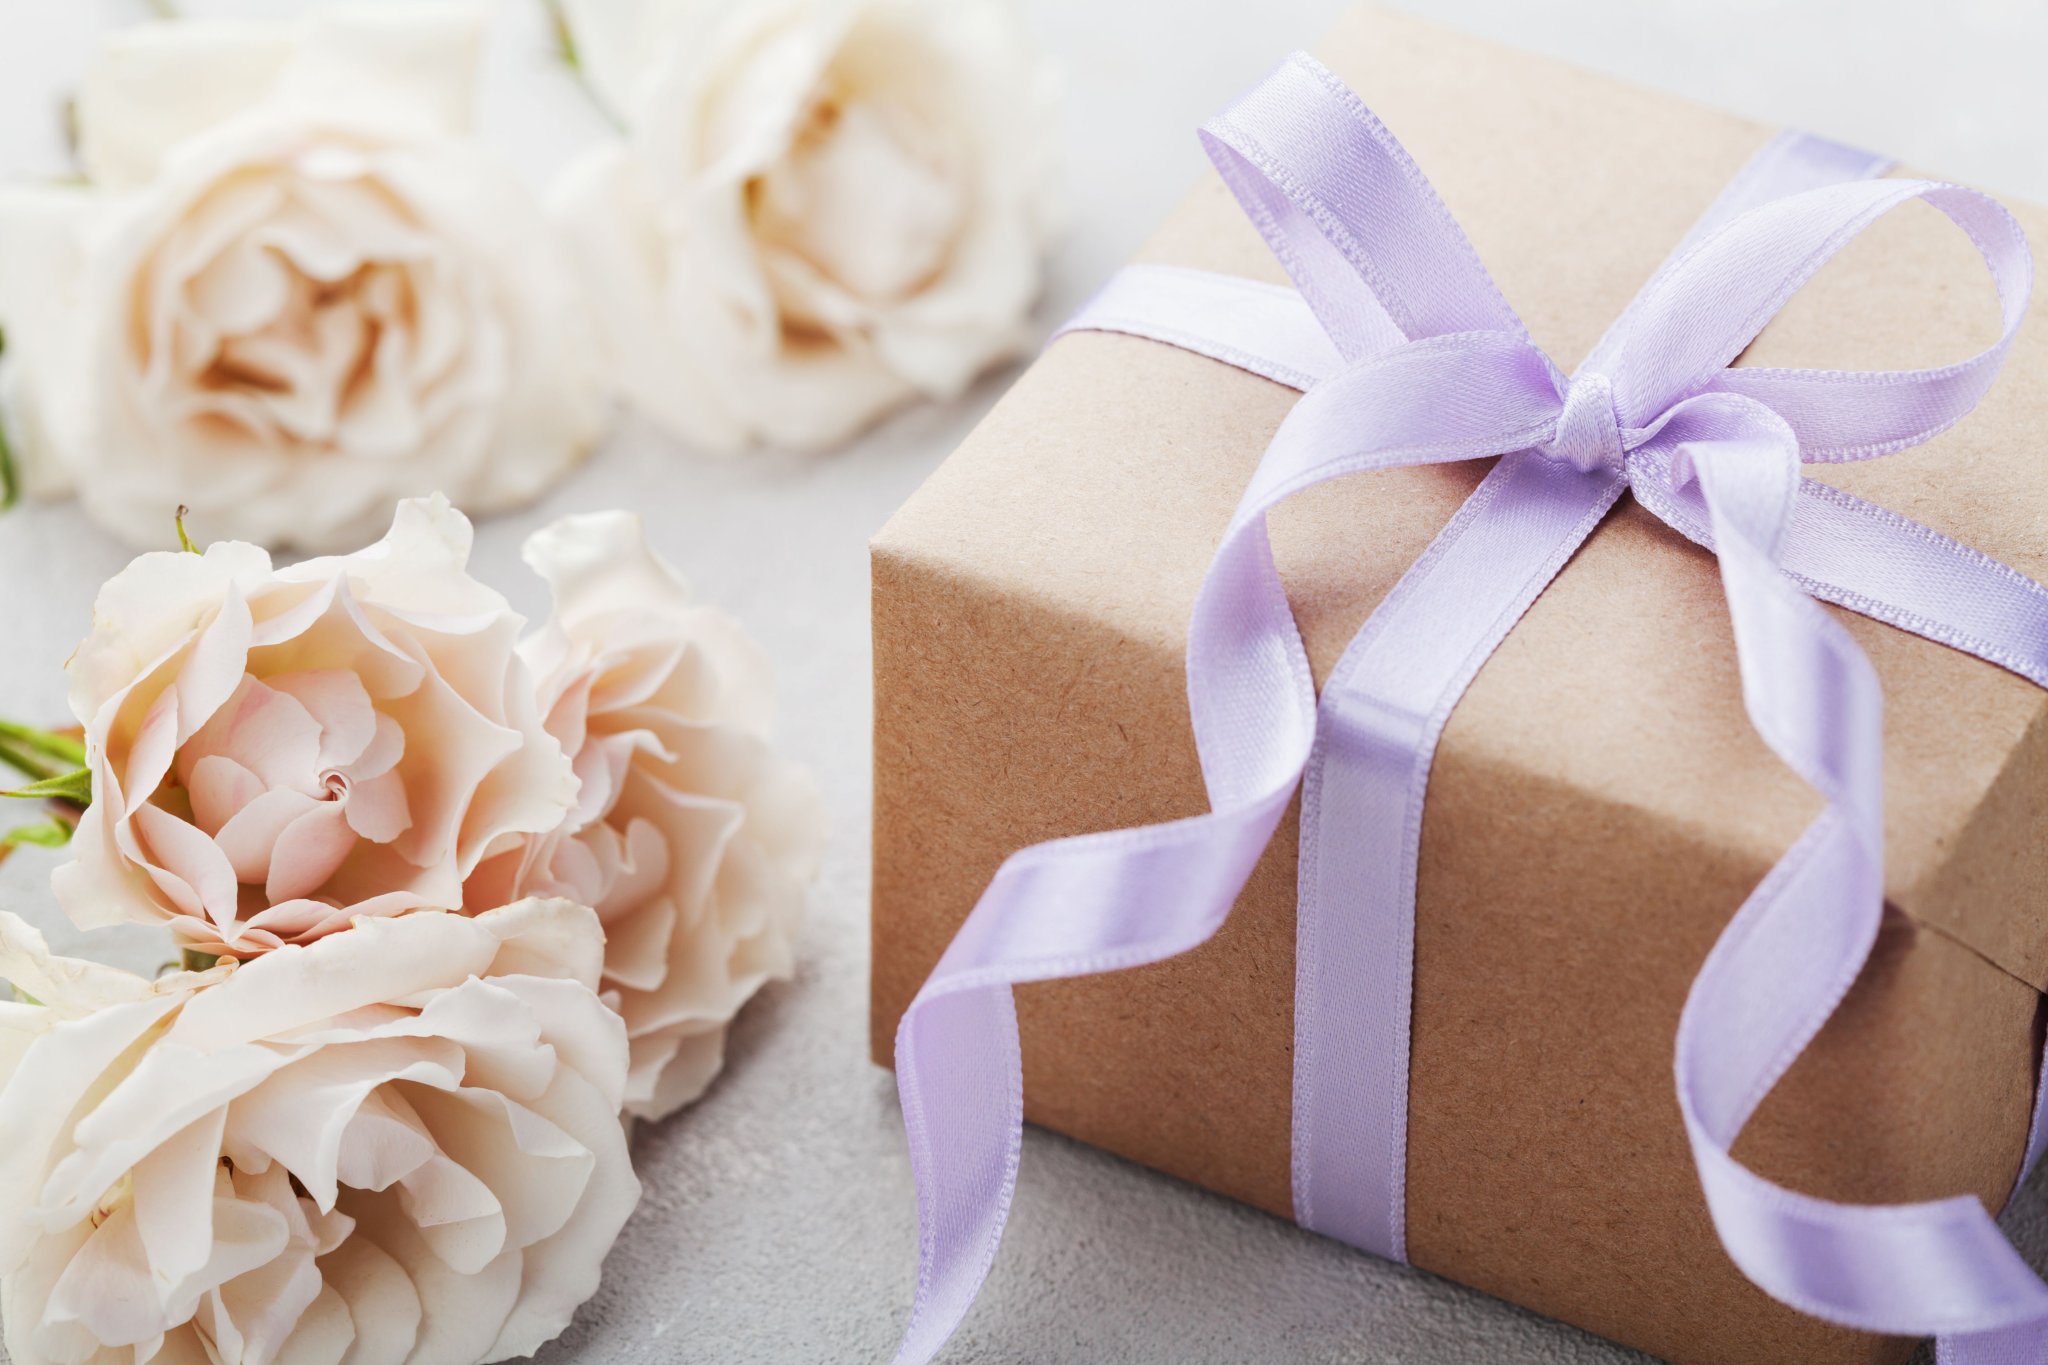 The Best Wedding Gift Ideas for Couples